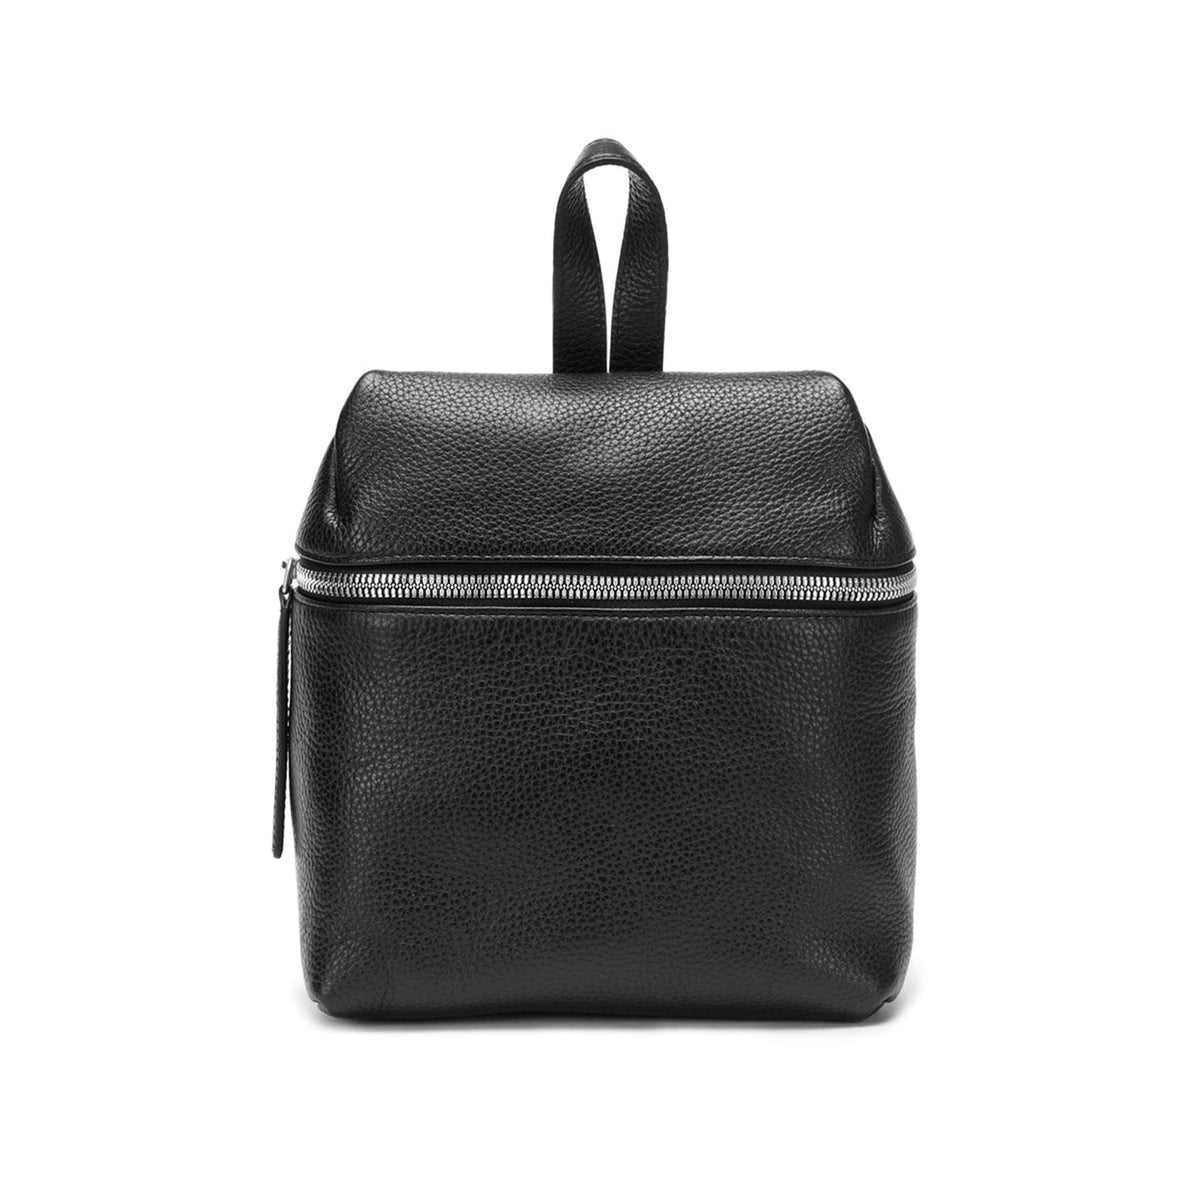 PEBBLE LEATHER SMALL BACKPACK / BLK